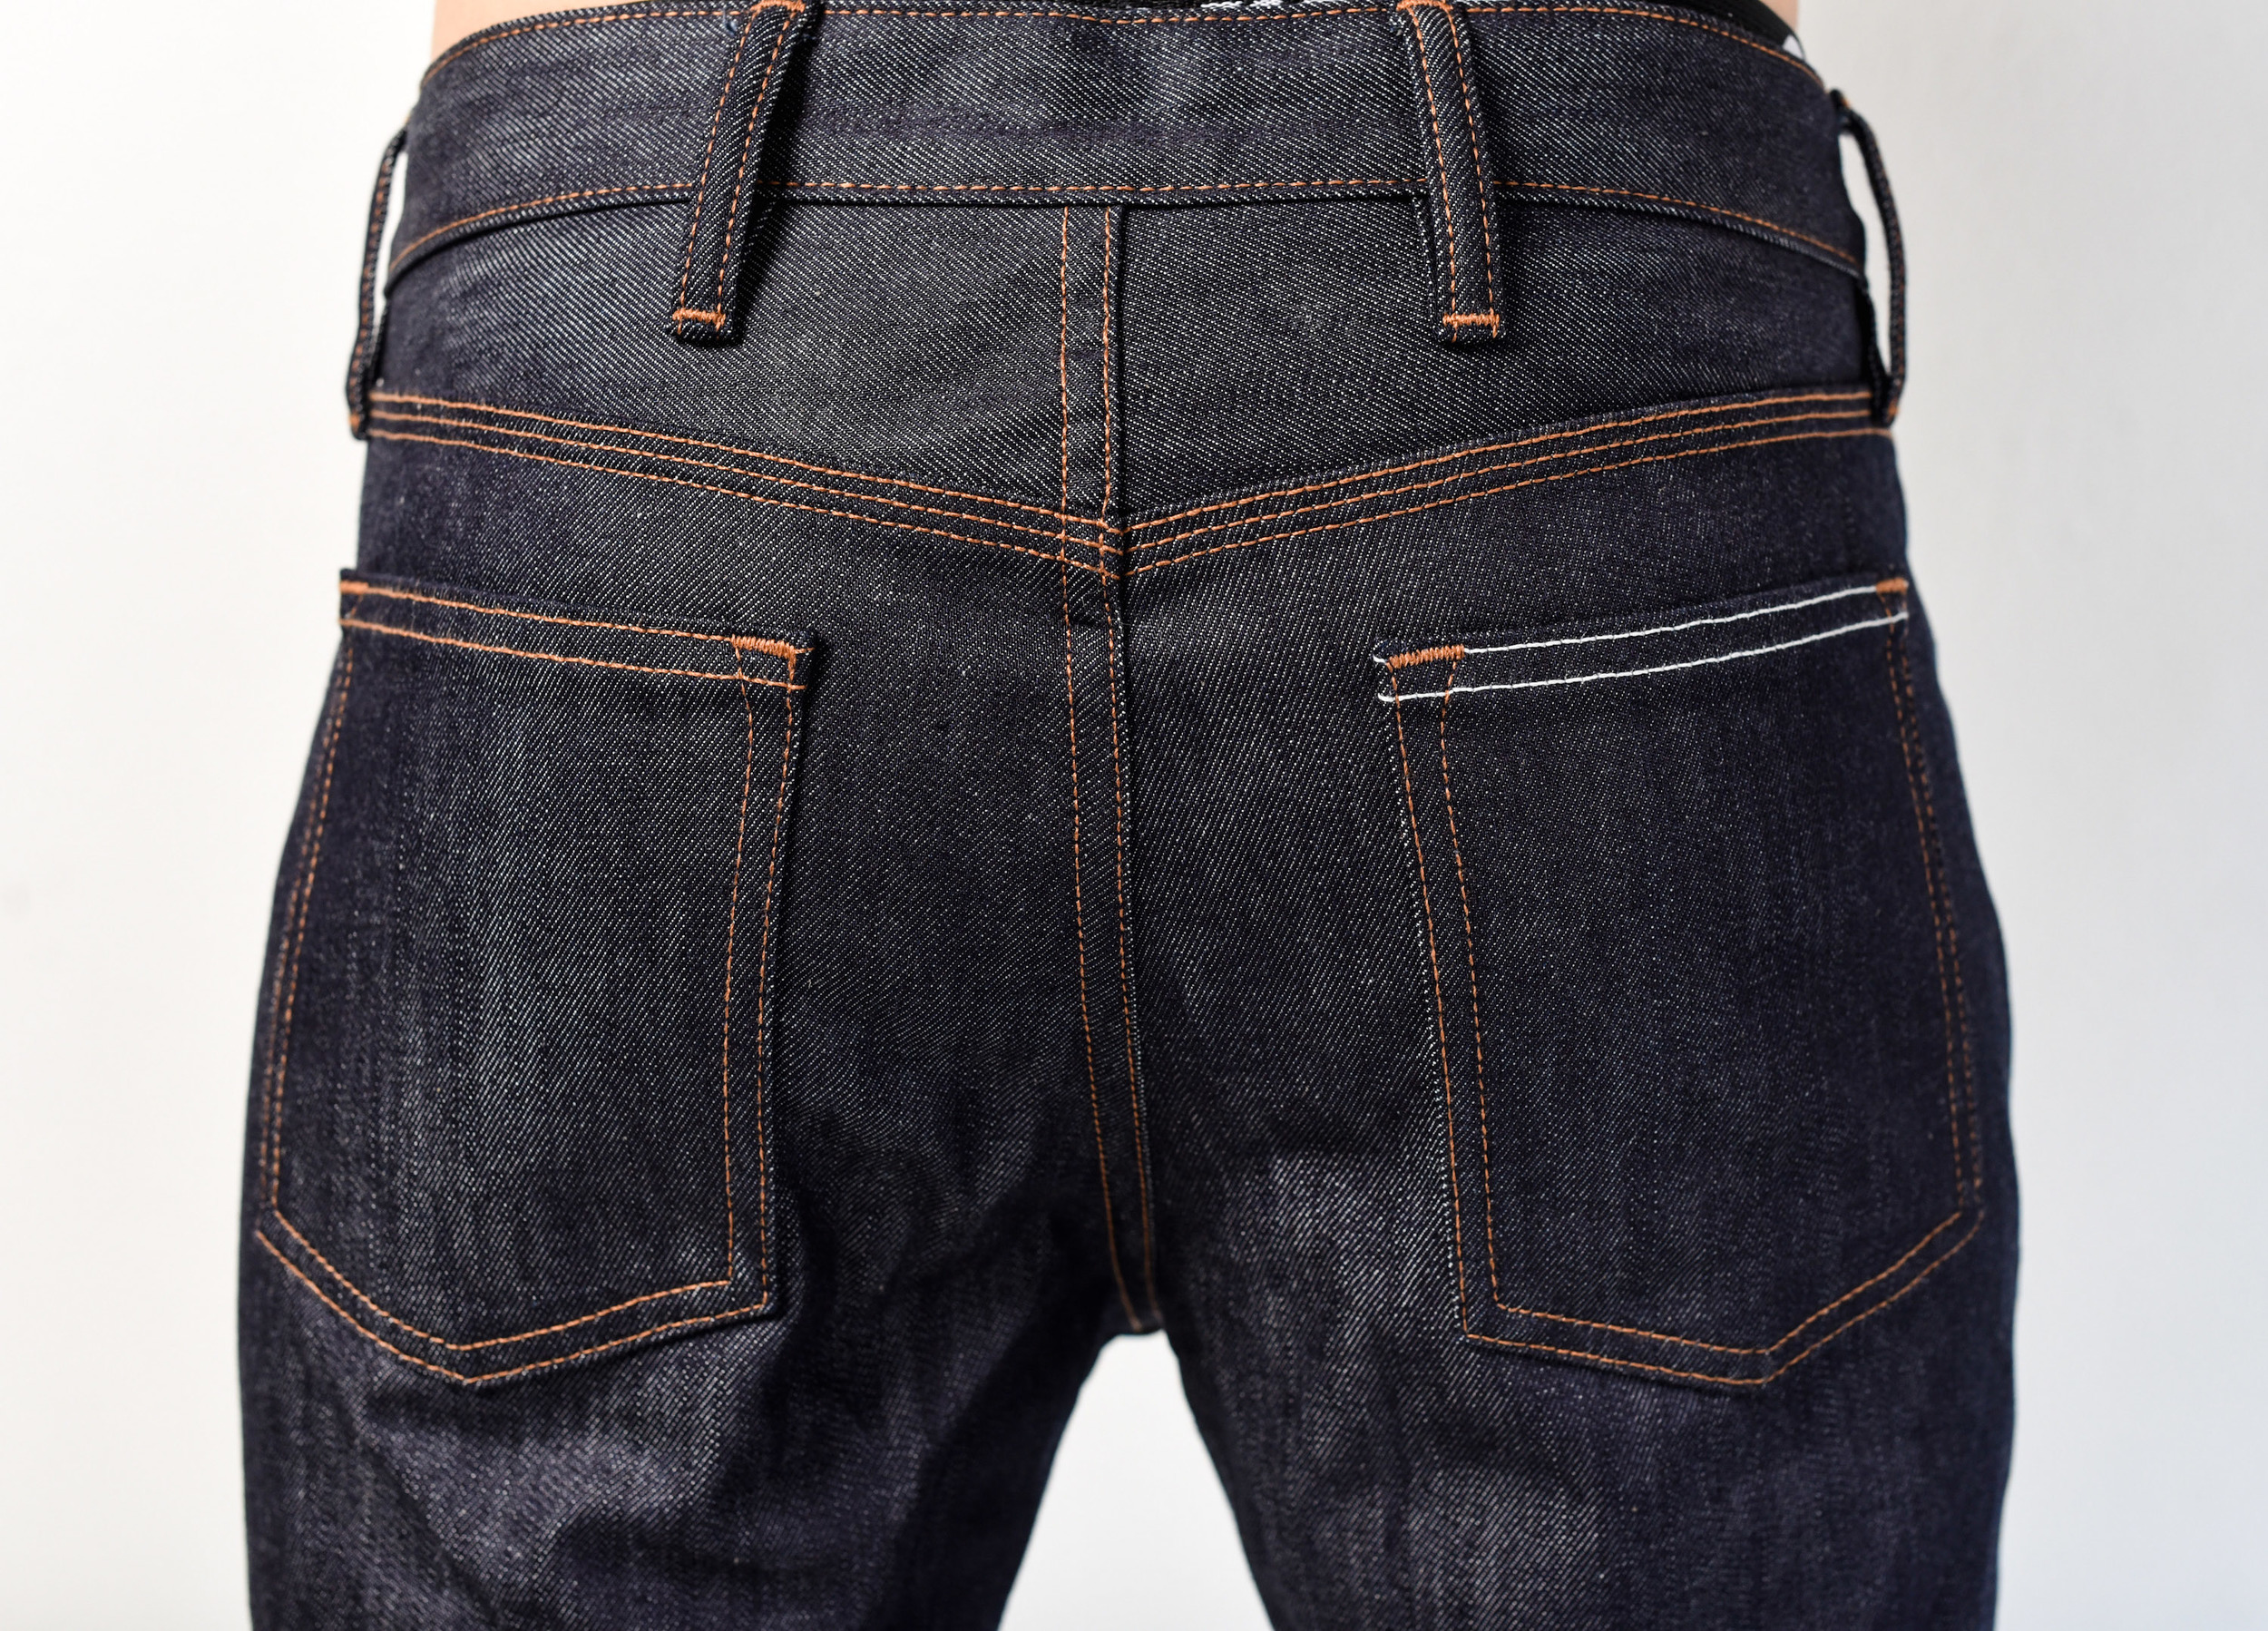 SOURCE Denim Ethical Raw Jeans (Men's) — SOURCE Denim - Simple, Rugged ...